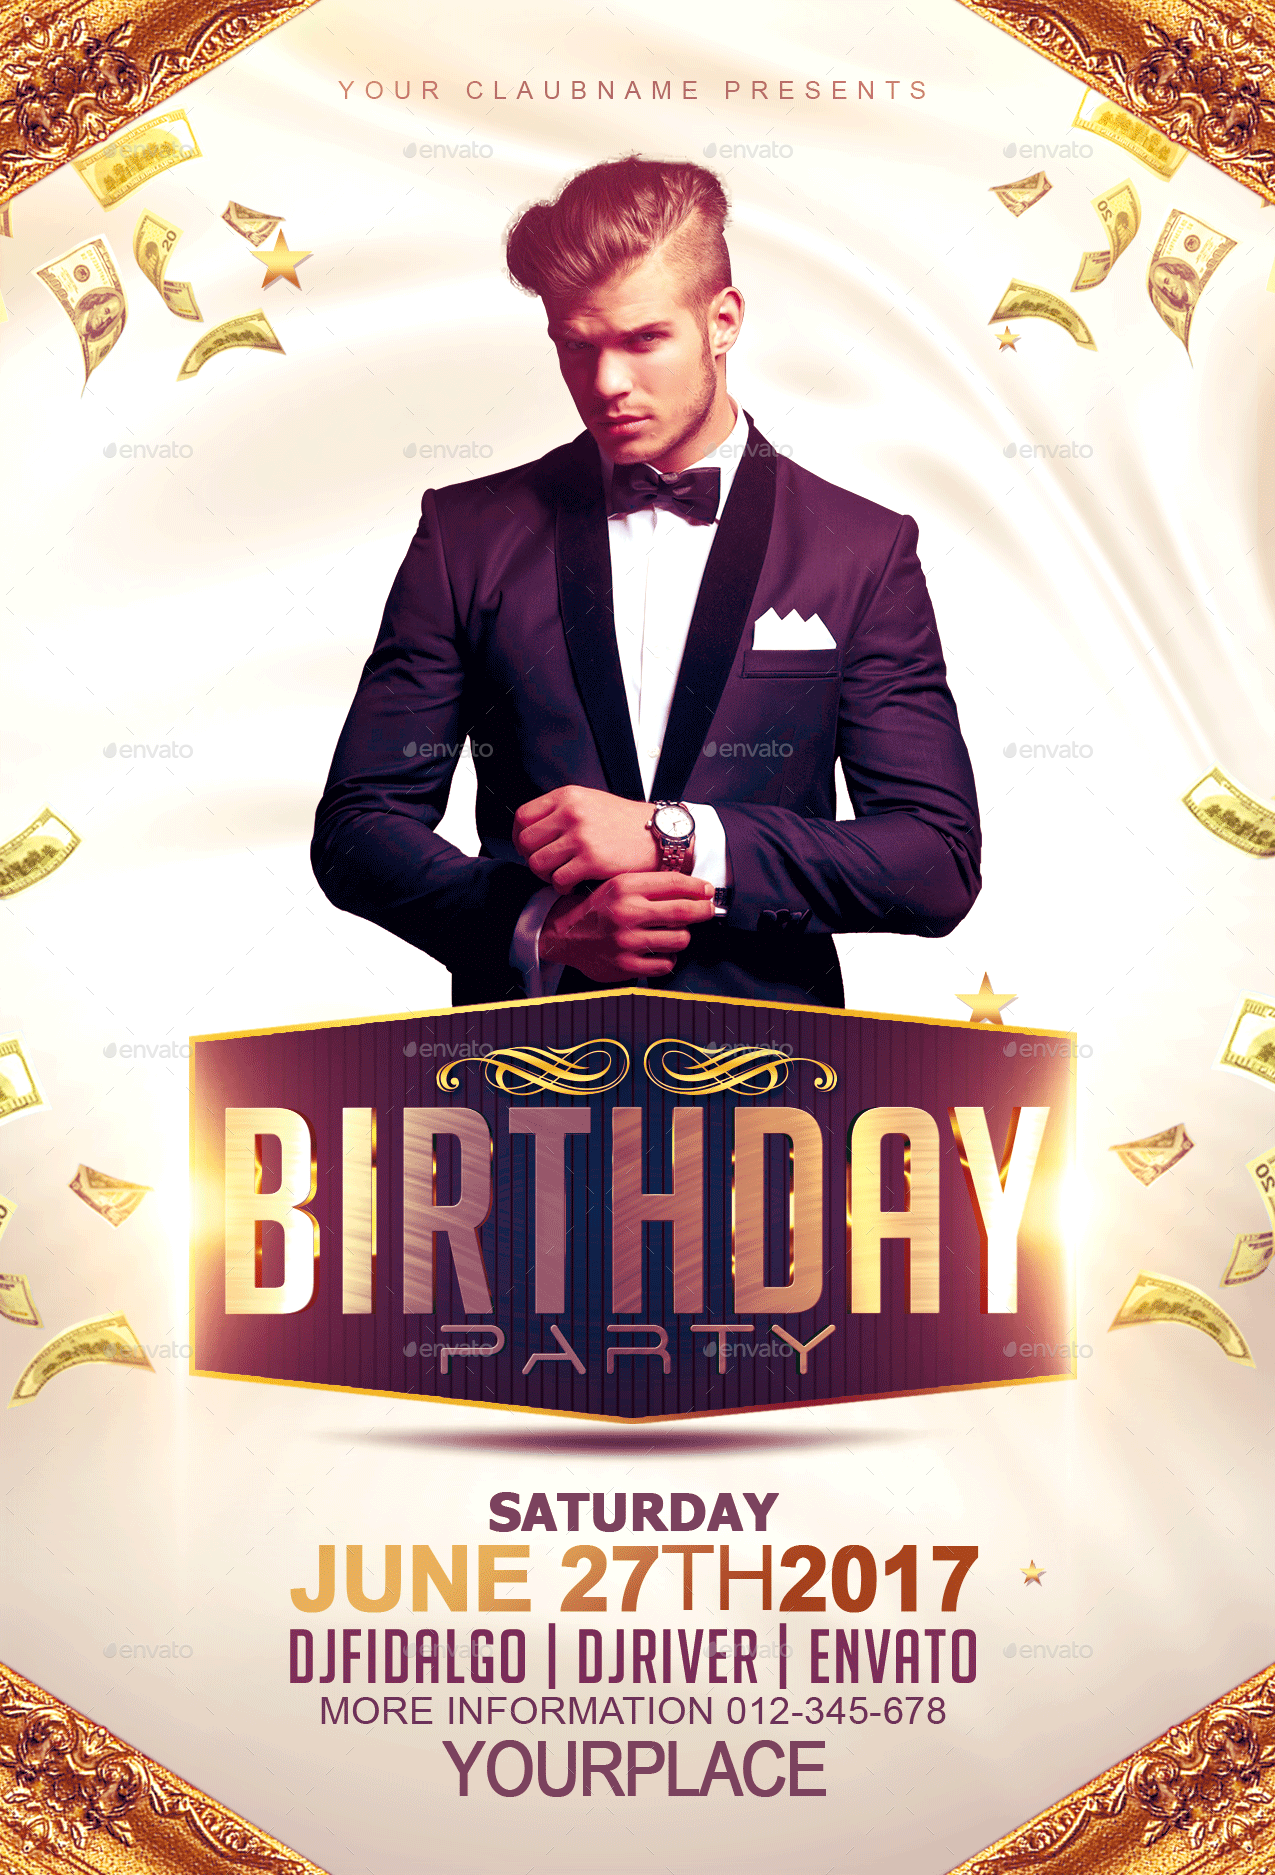 birthday-party-flyers-white-and-gold-birthday-party-free-flyer